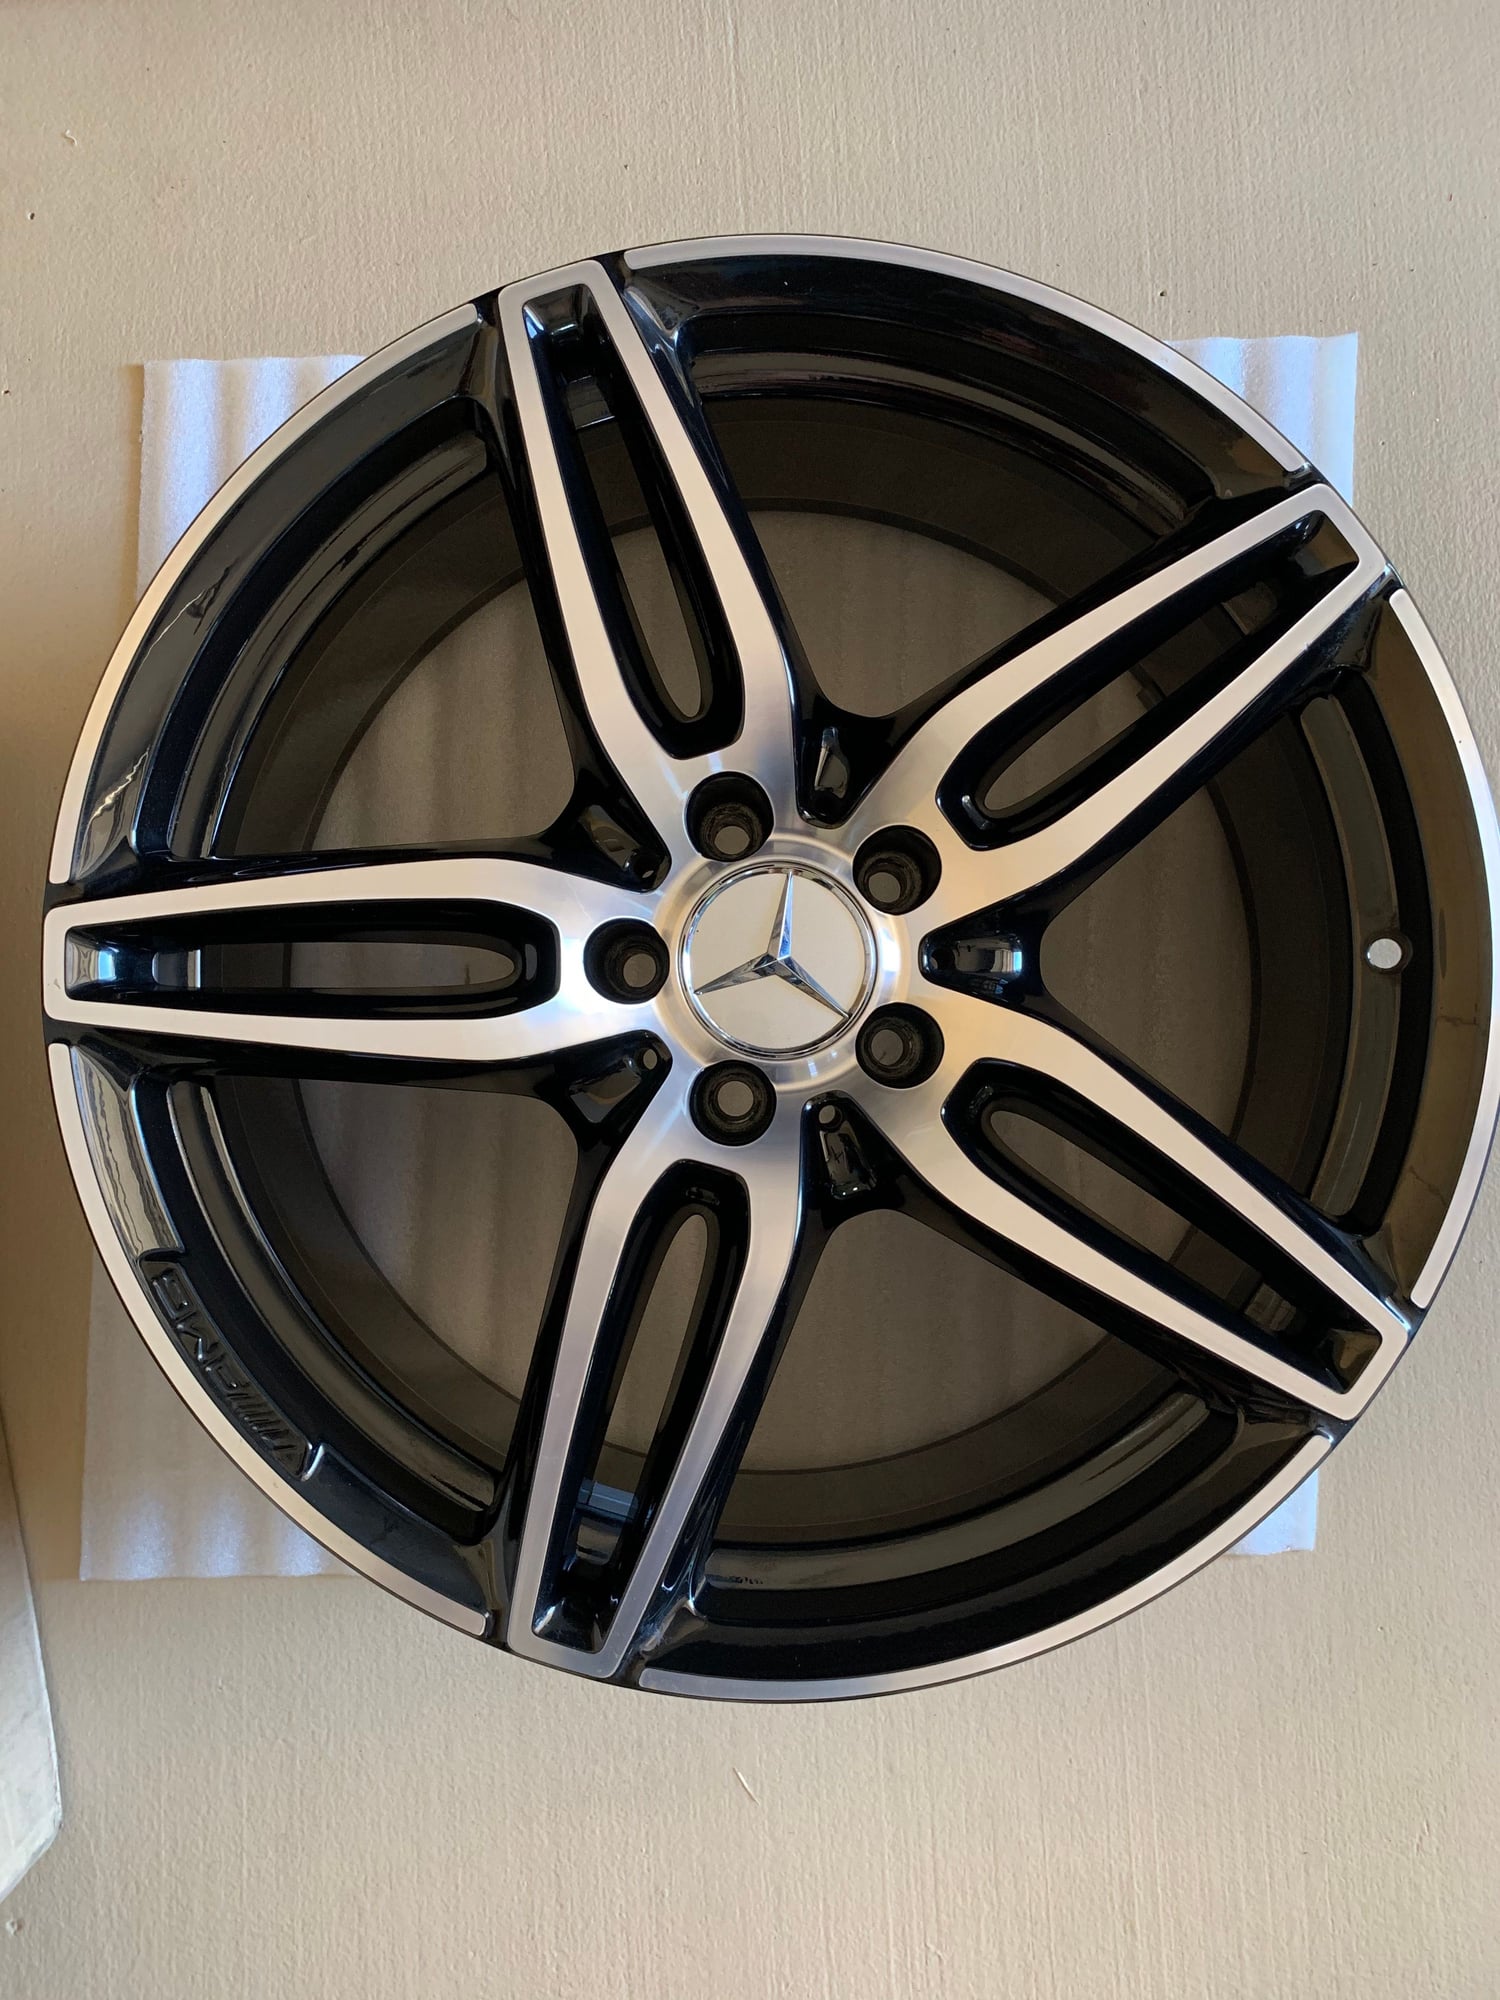 Wheels and Tires/Axles - 19" Mercedes AMG OEM Wheels (2) Fronts - Used - 2015 to 2020 Mercedes-Benz E350 - Scottsdale, AZ 85255, United States